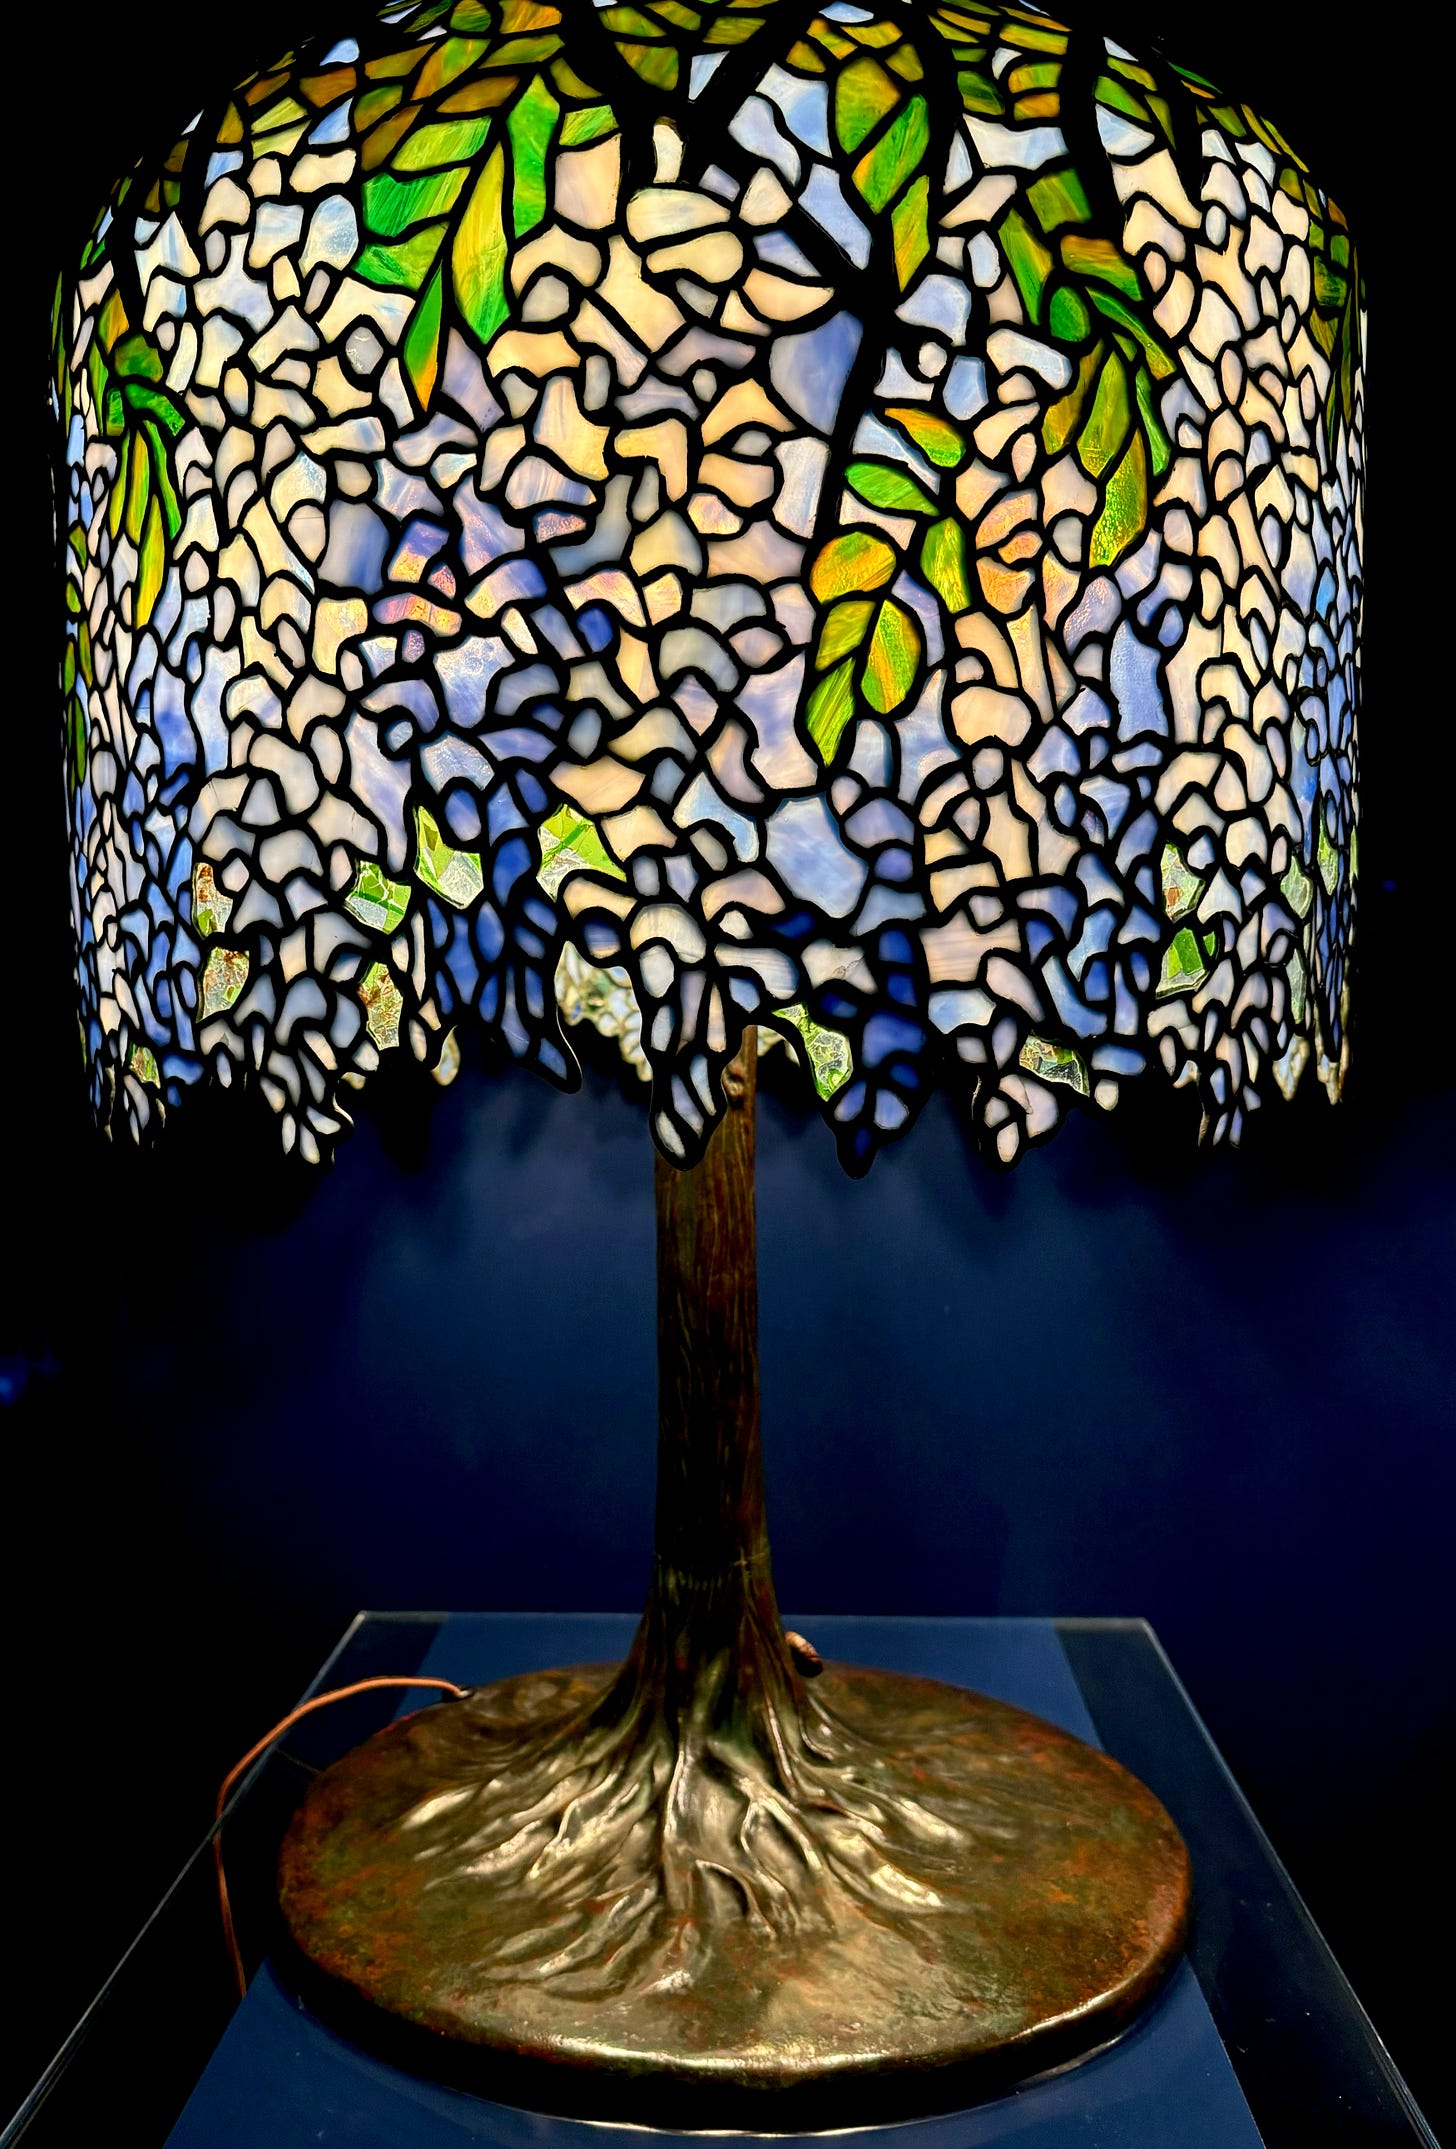 A wisteria lamp. Different pieces of pale blue glass come together to form wisteria petals, with green glass forming leaves on the top of the lamp shade. The base is metal that looks almost like lustrous wood.